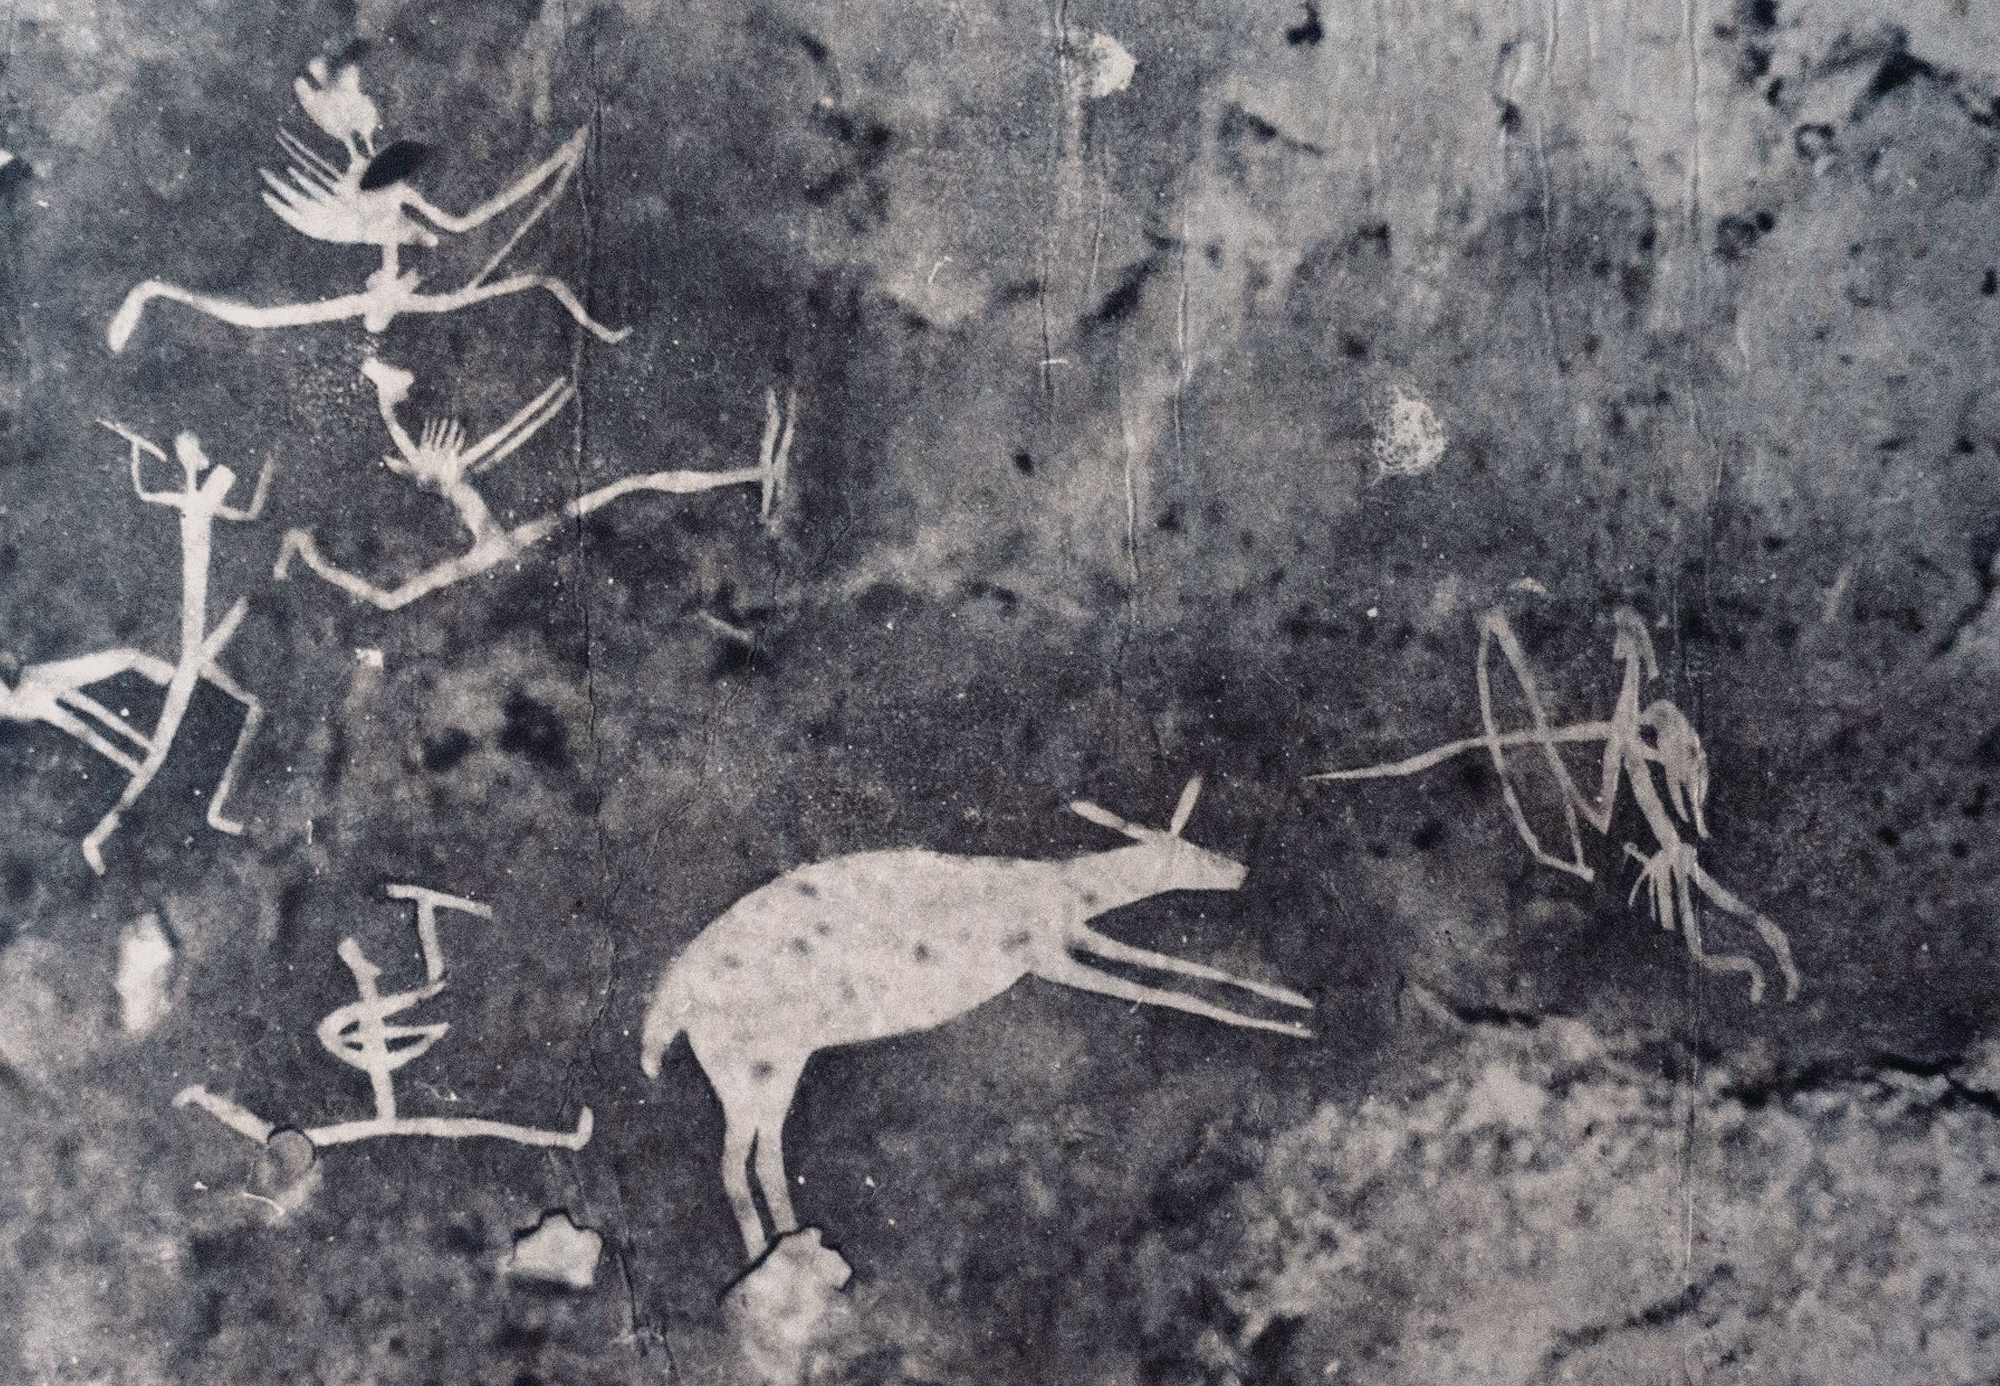 Junction Shelter: animal figure with both sheep and antelope features, surrounded by humans with hunting equipment, some of whom appear to be hunting. Photographed in the Pager archive at the Rock Art Research Institute, University of the Witwatersrand